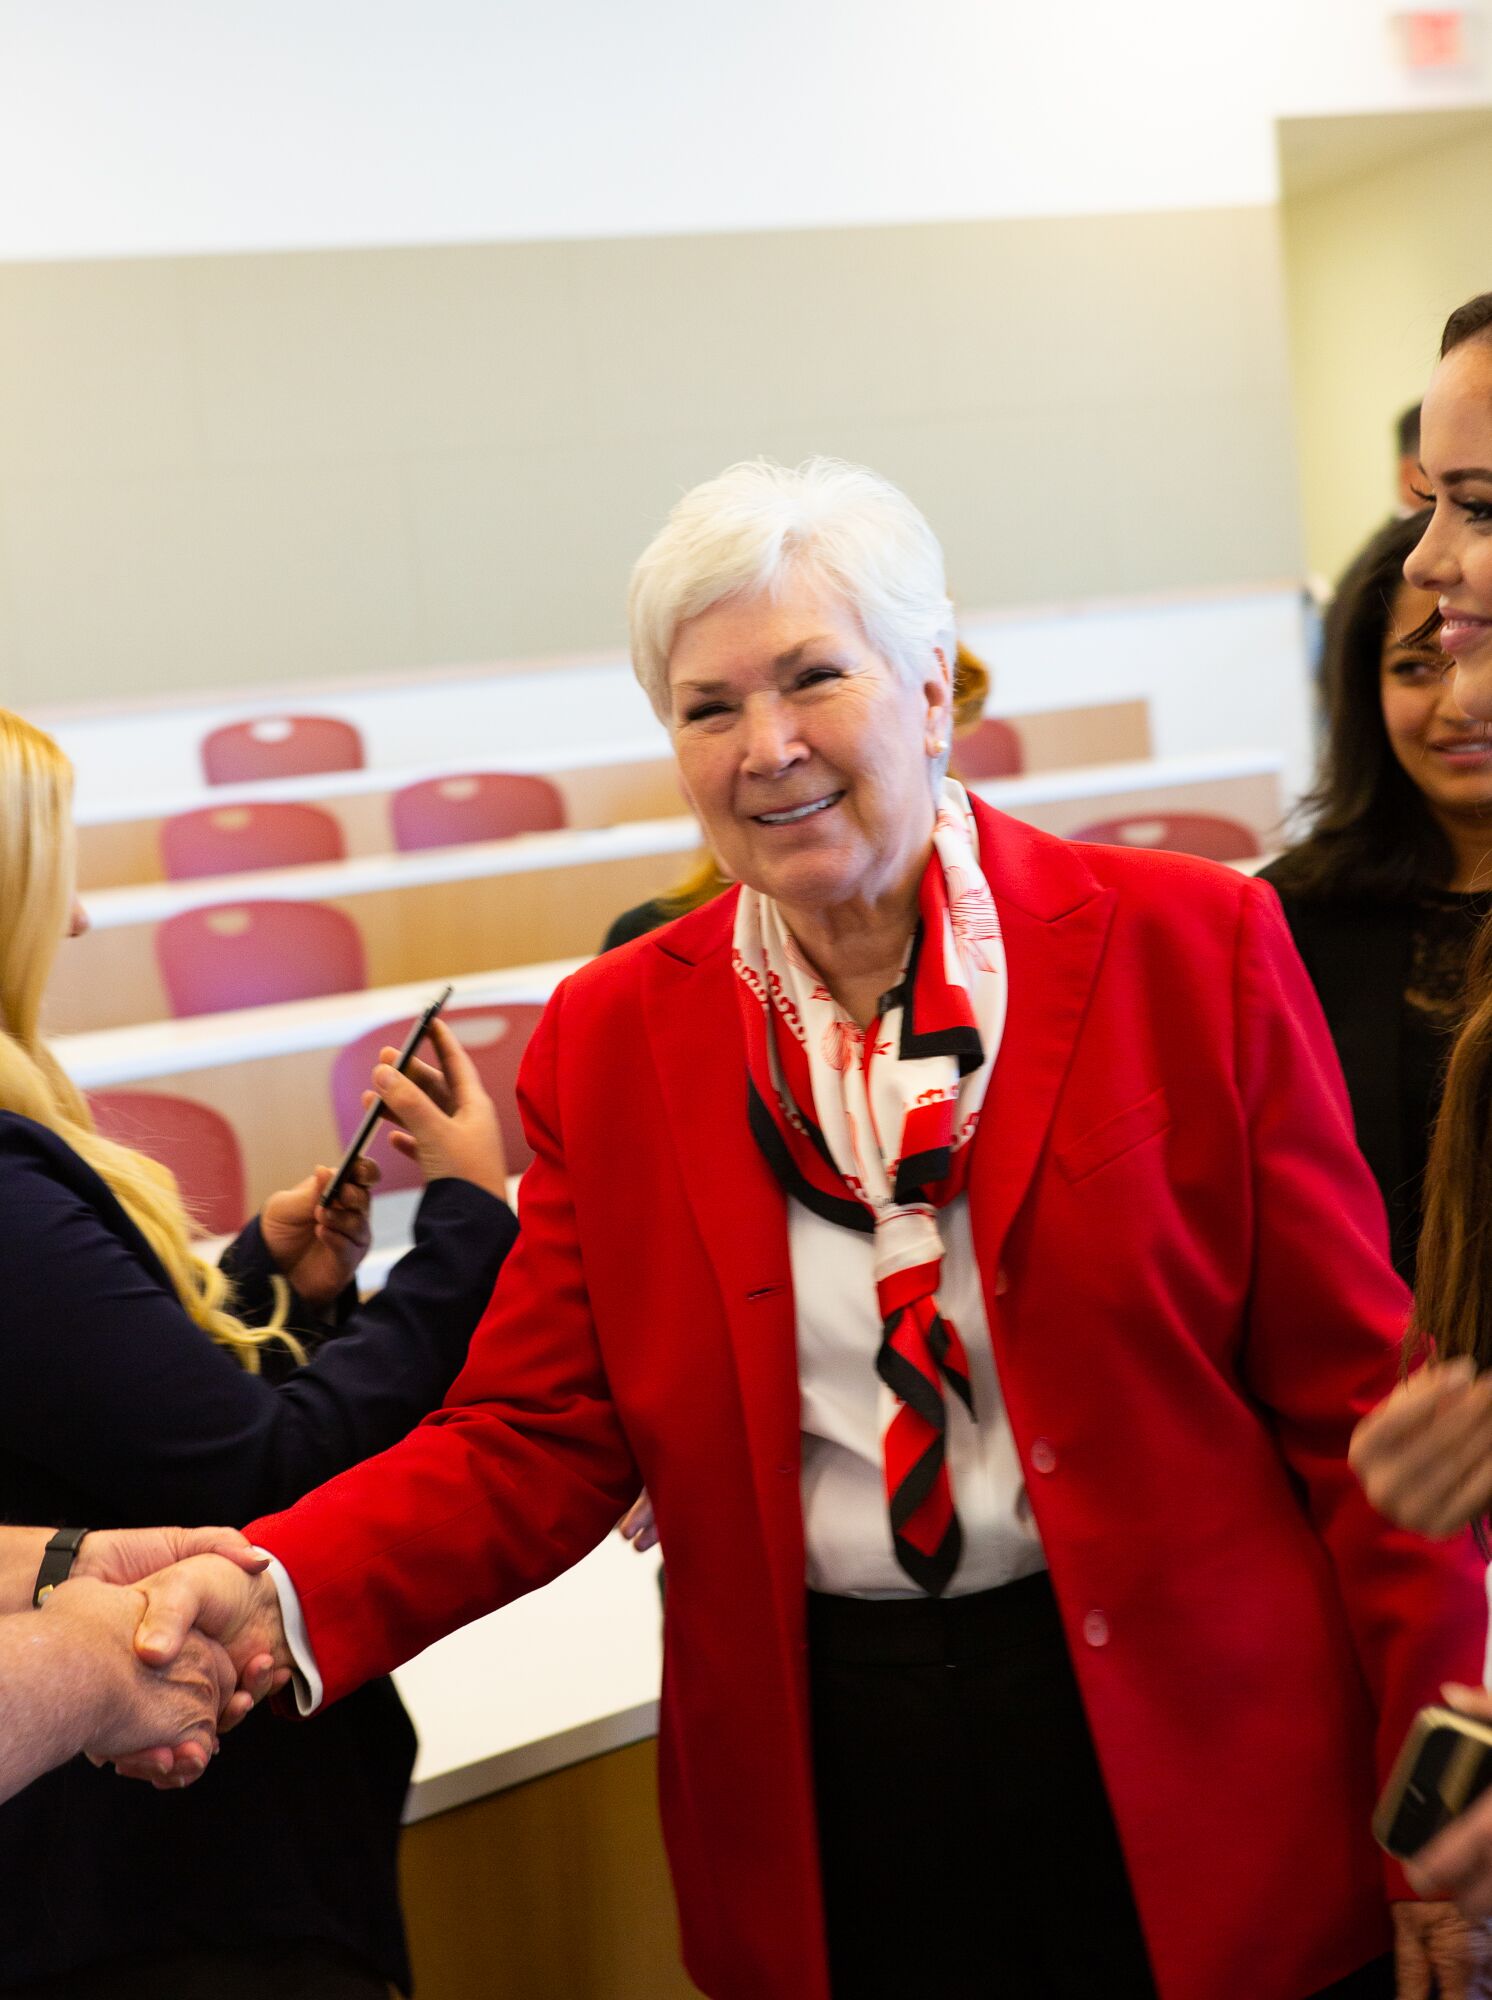 Gail Miller is the keynote speaker at the Spencer Fox Eccles Convocation